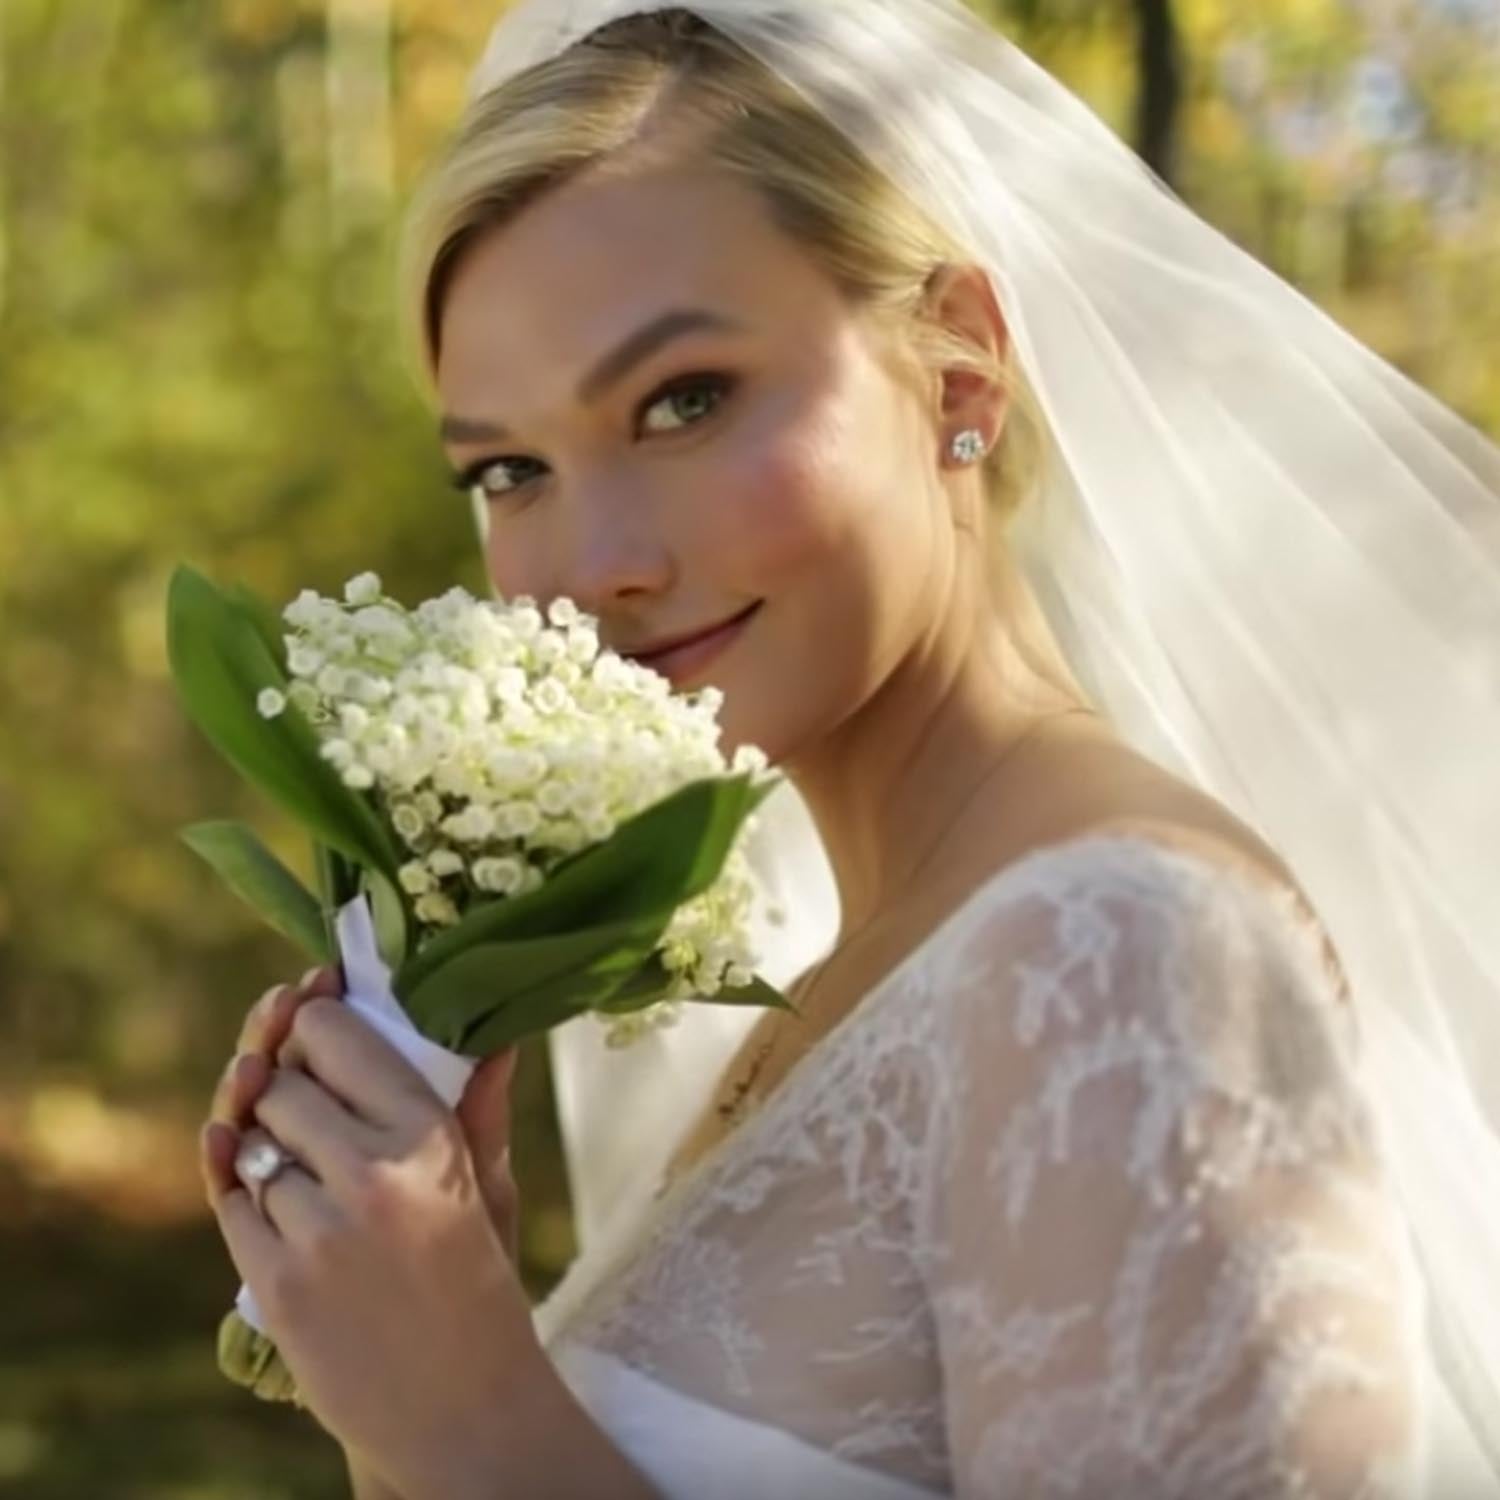 Watch Karlie Kloss's Christian Dior Couture Wedding Gown Come